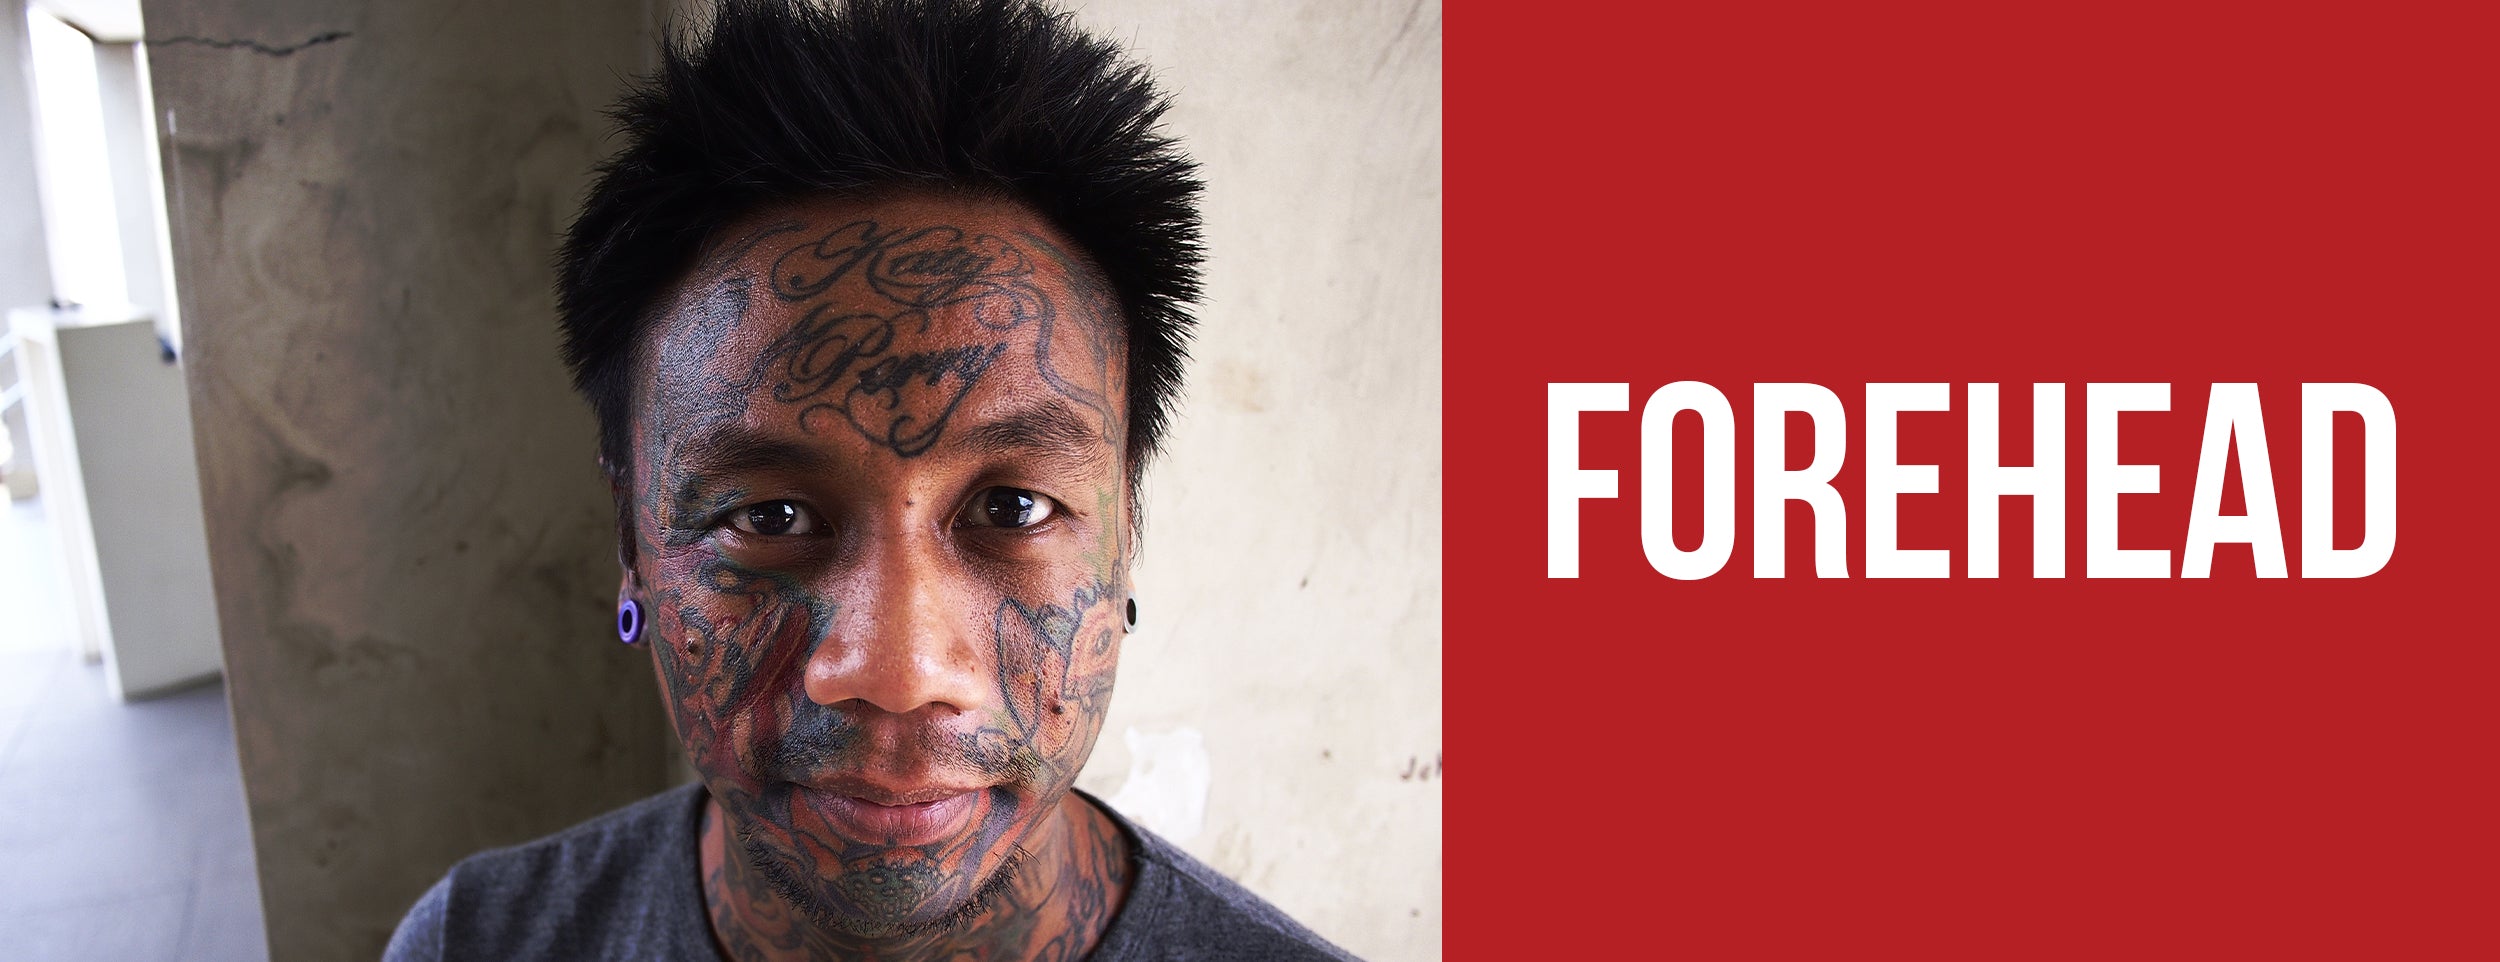 Painful forehead tattoos